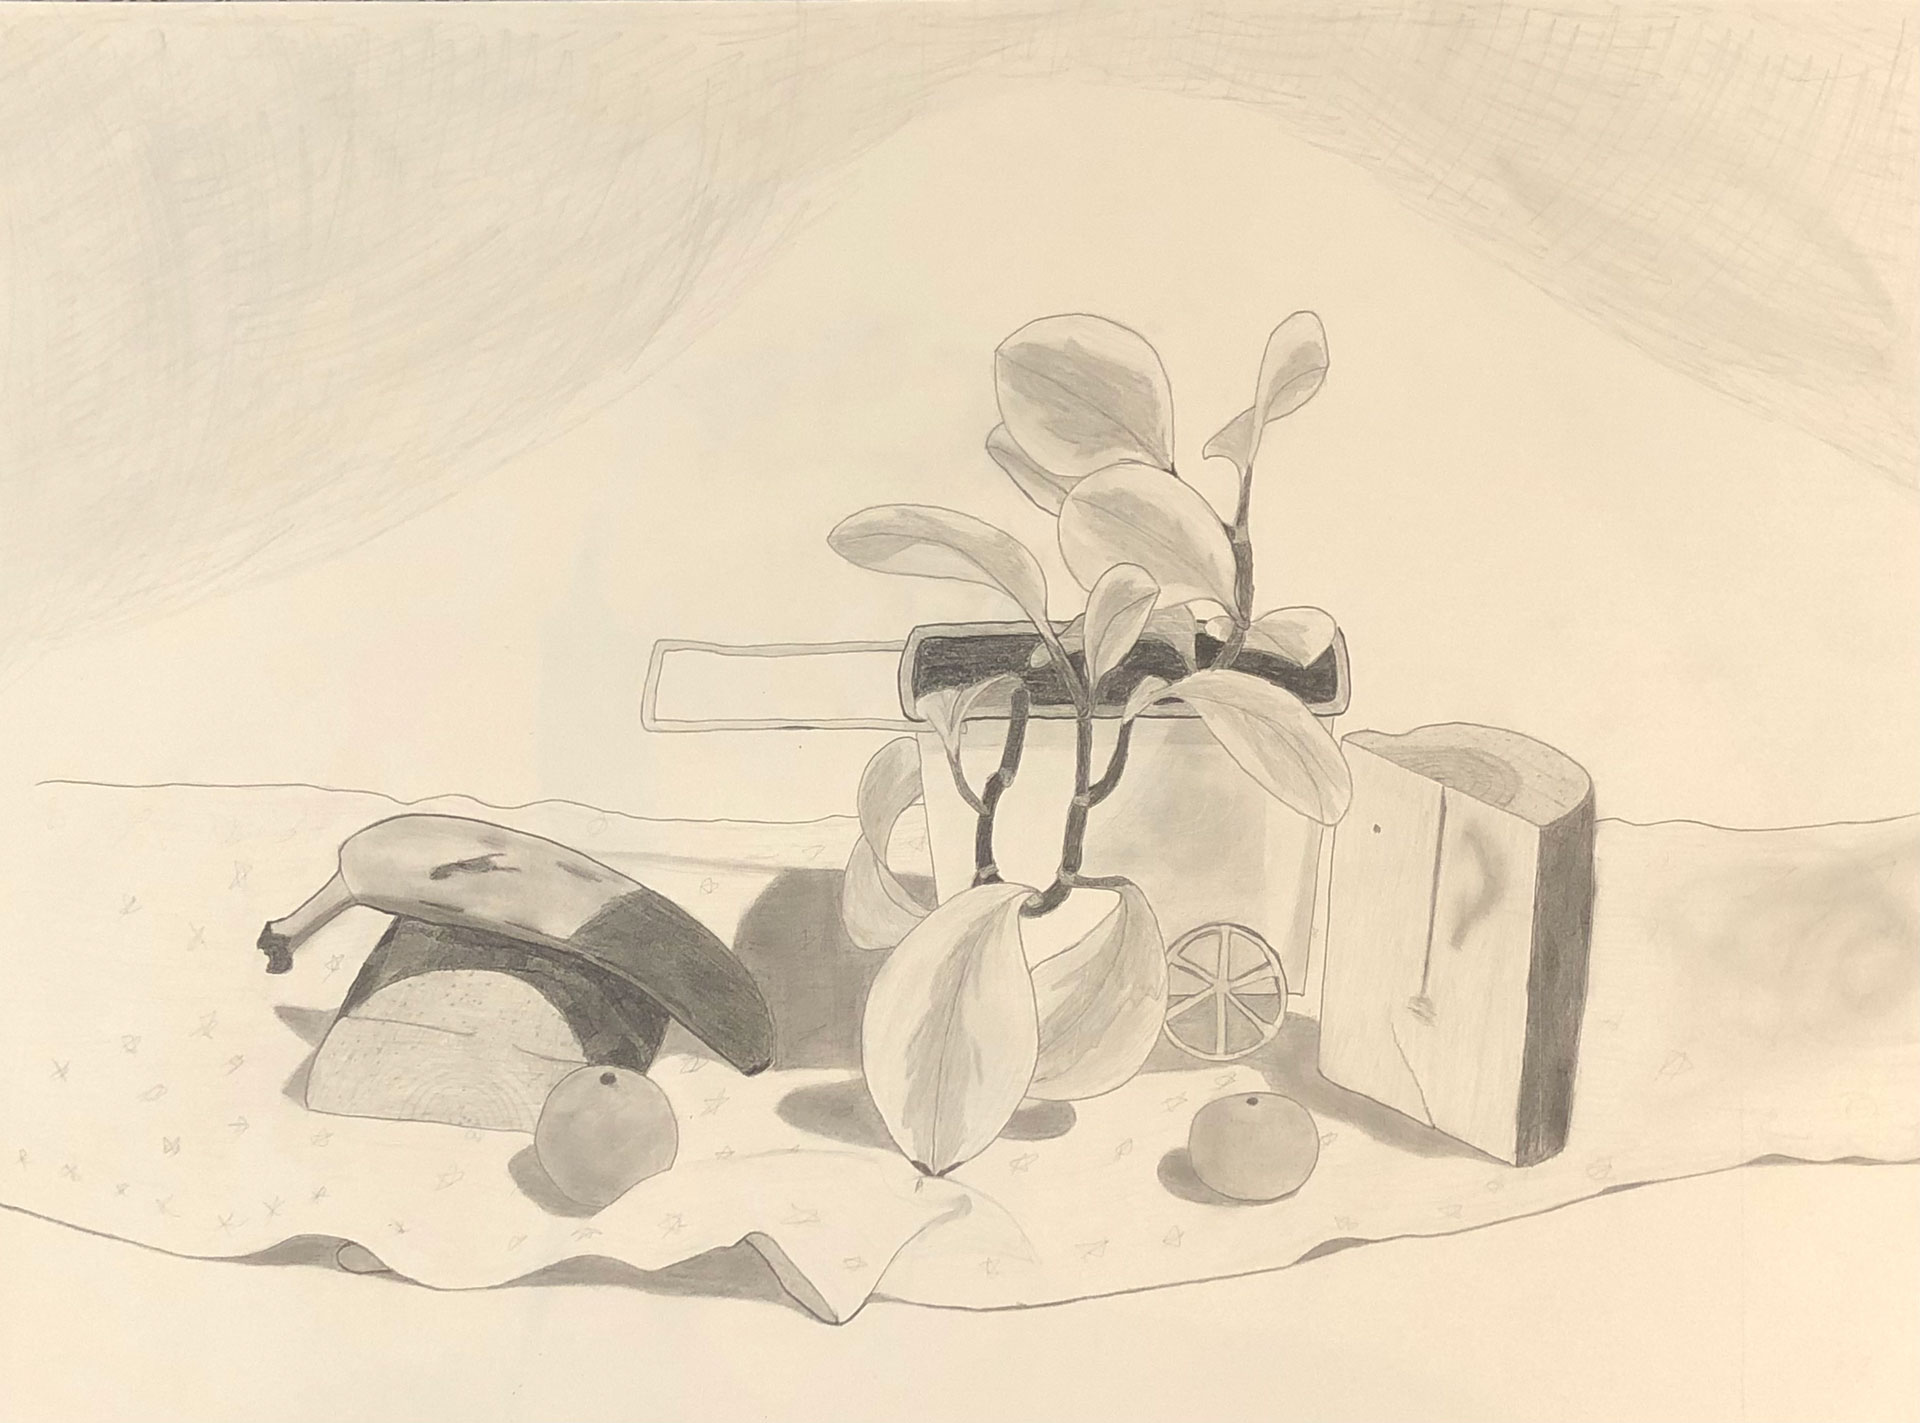 A still life of 6 biomorphic objects, including: two halves of a small log, two oranges, a banana, and a plant in a cart-shaped pot on some fabric.